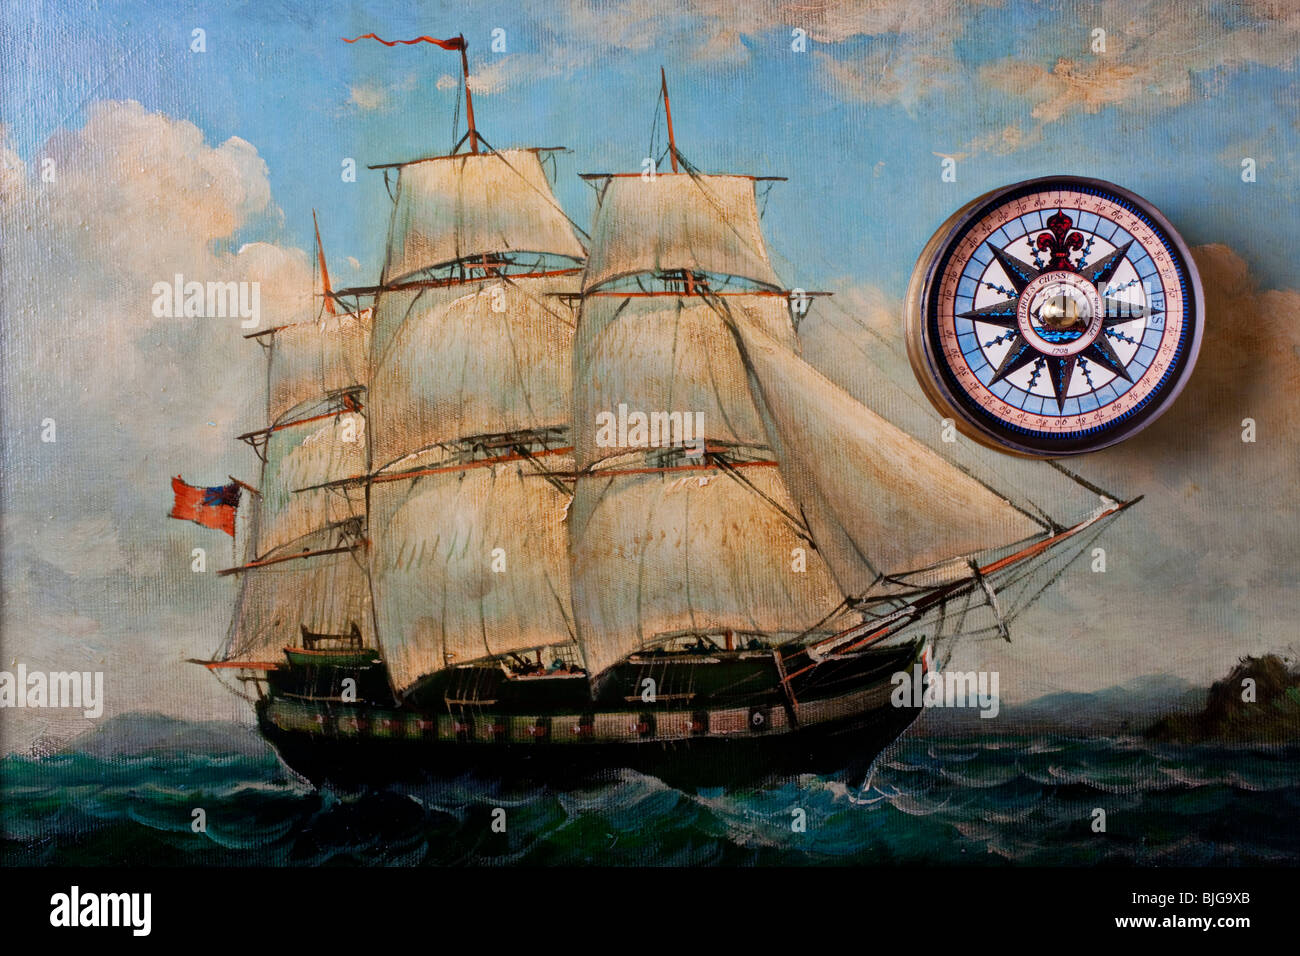 Old ship paining and compass Stock Photo